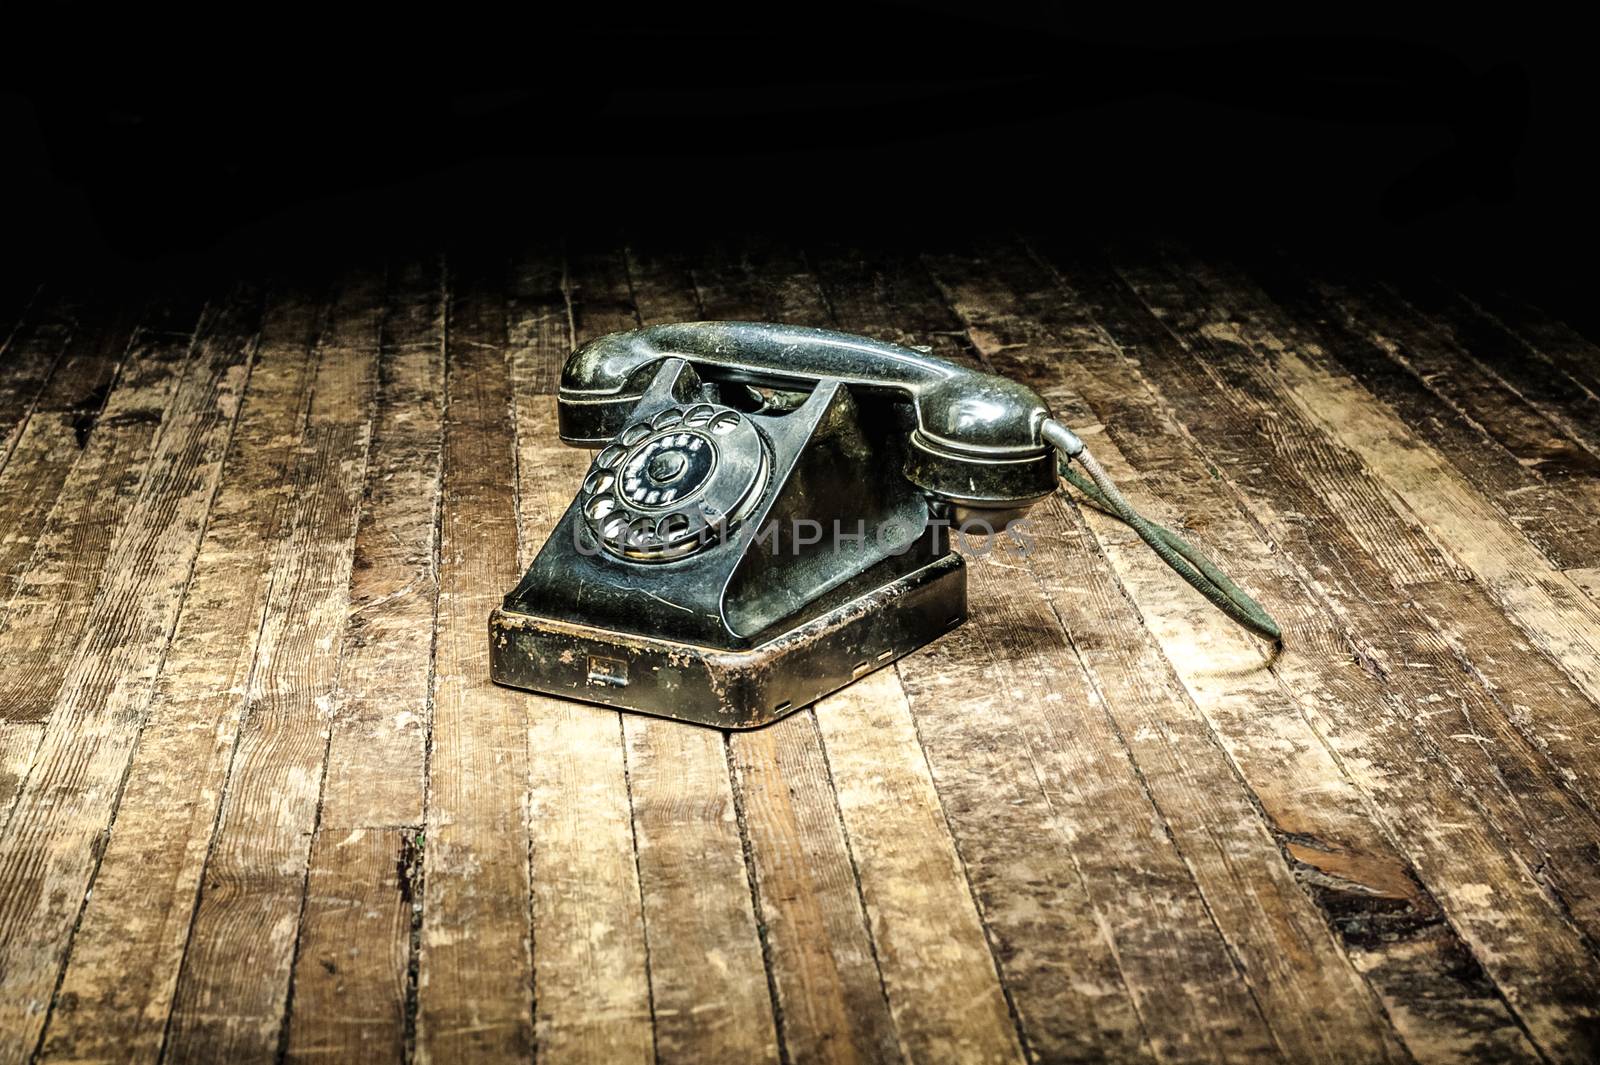 black retro telephone with a rotary dial stands on a wooden floor in the dark by chernobrovin